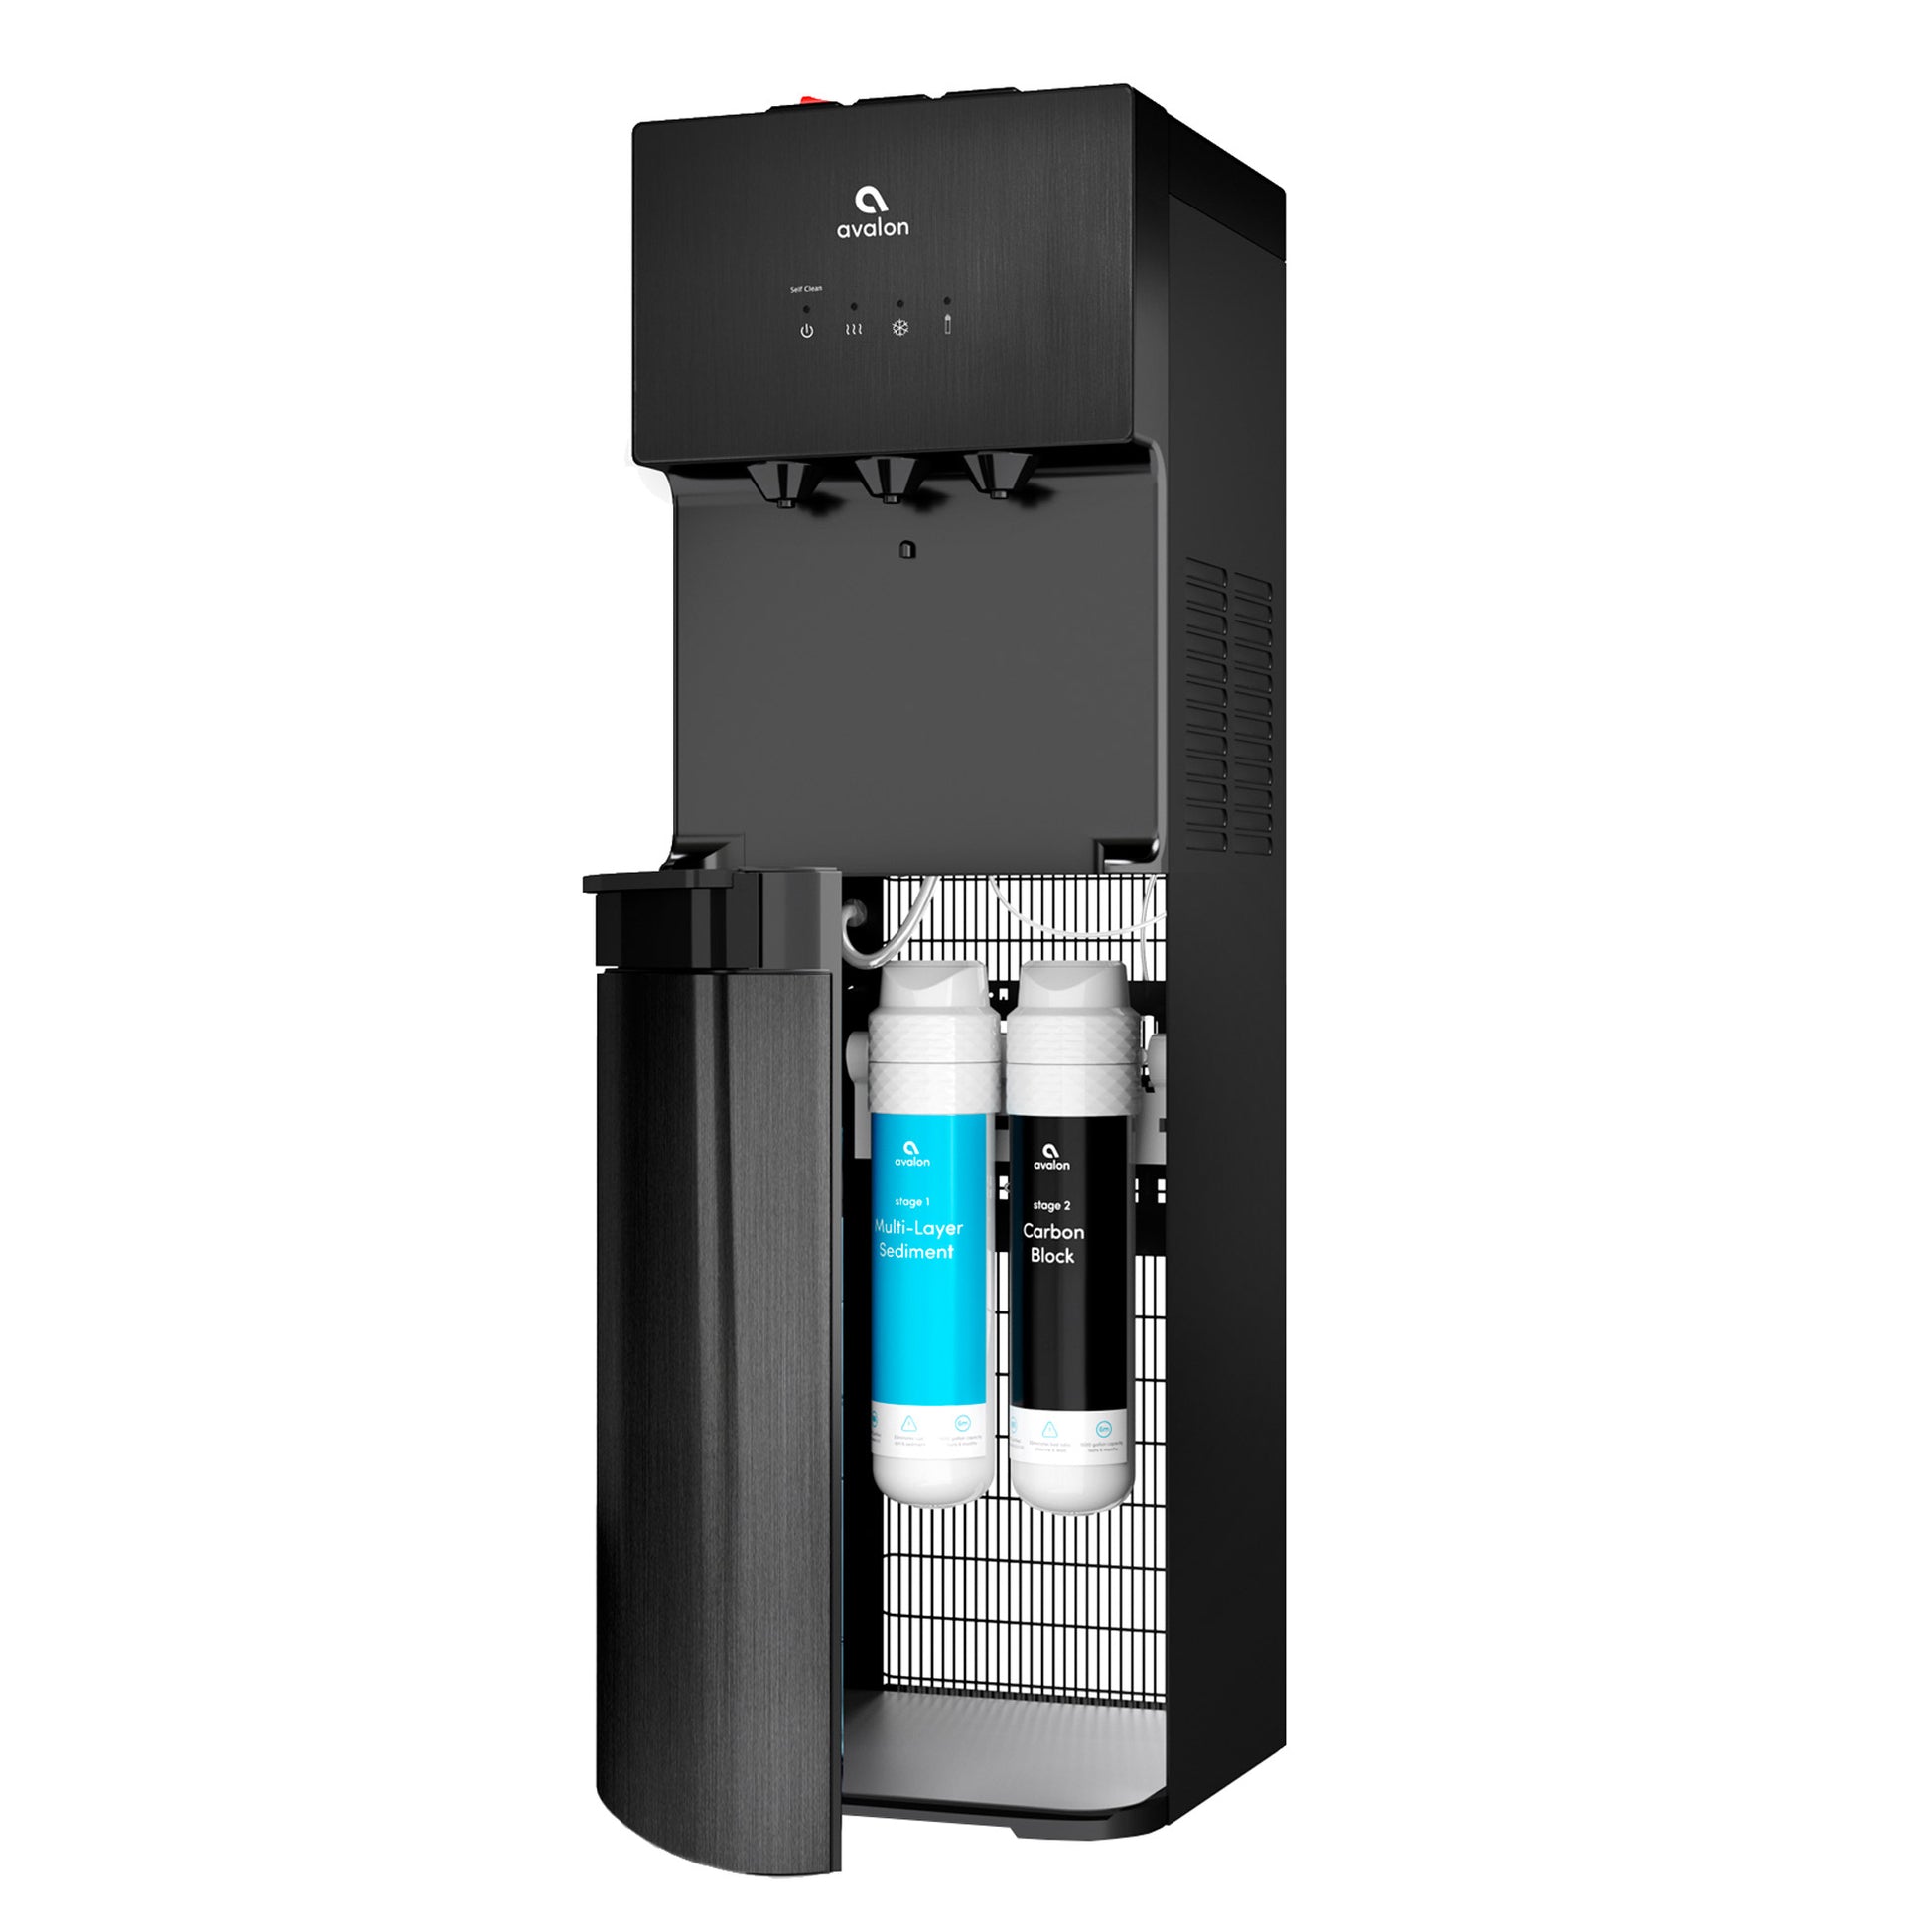 Avalon A5-C Bottleless Point-Of-Use Water Cooler with Installation Kit and Additional Filters